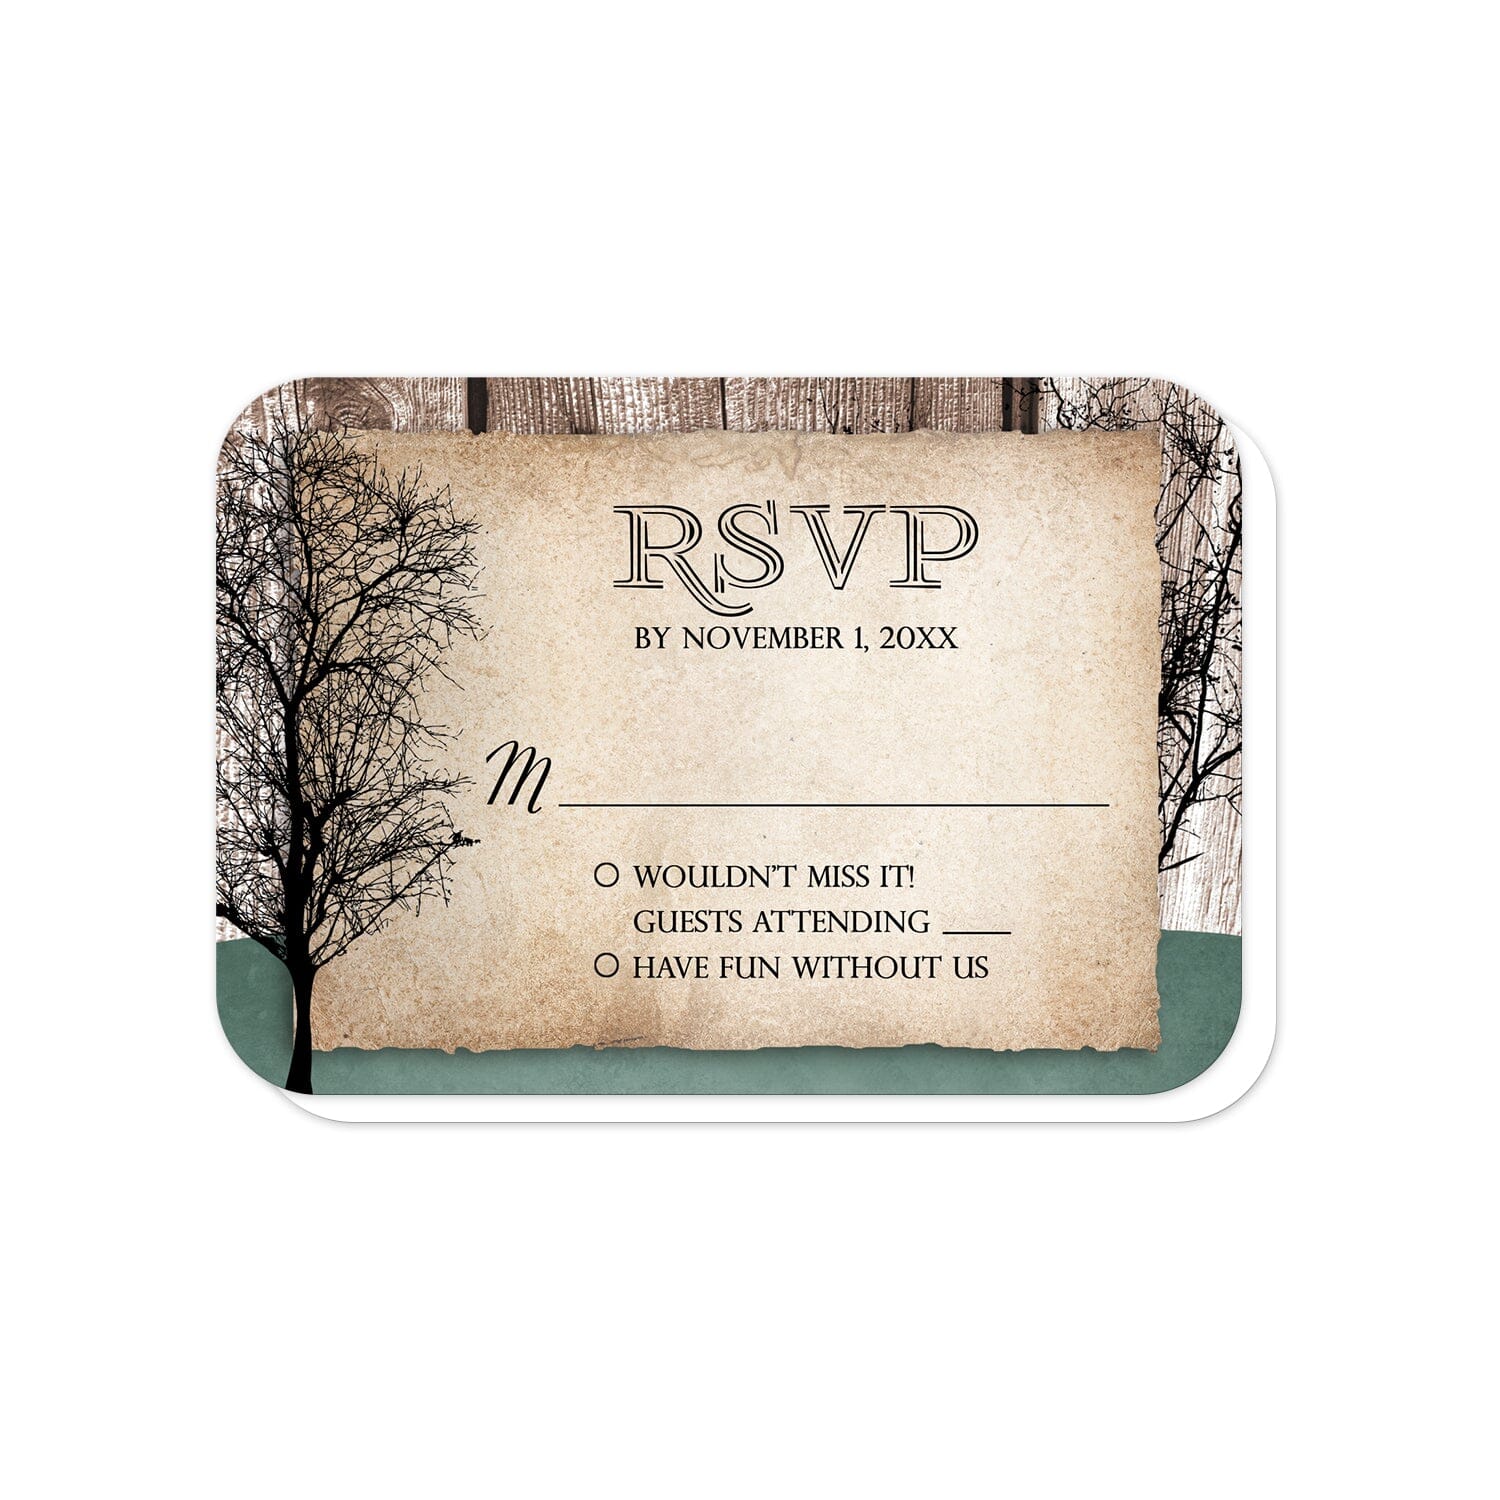 Rustic Woodsy Deer RSVP Cards (with rounded corners) at Artistically Invited. Rustic woodsy deer wedding invitations designed with silhouettes of a buck deer with antlers, a doe, and winter trees over a wood brown background and a faded hunter green design along the bottom. Your personalized RSVP date details are custom printed in black over a tattered rustic paper illustration between the deer.